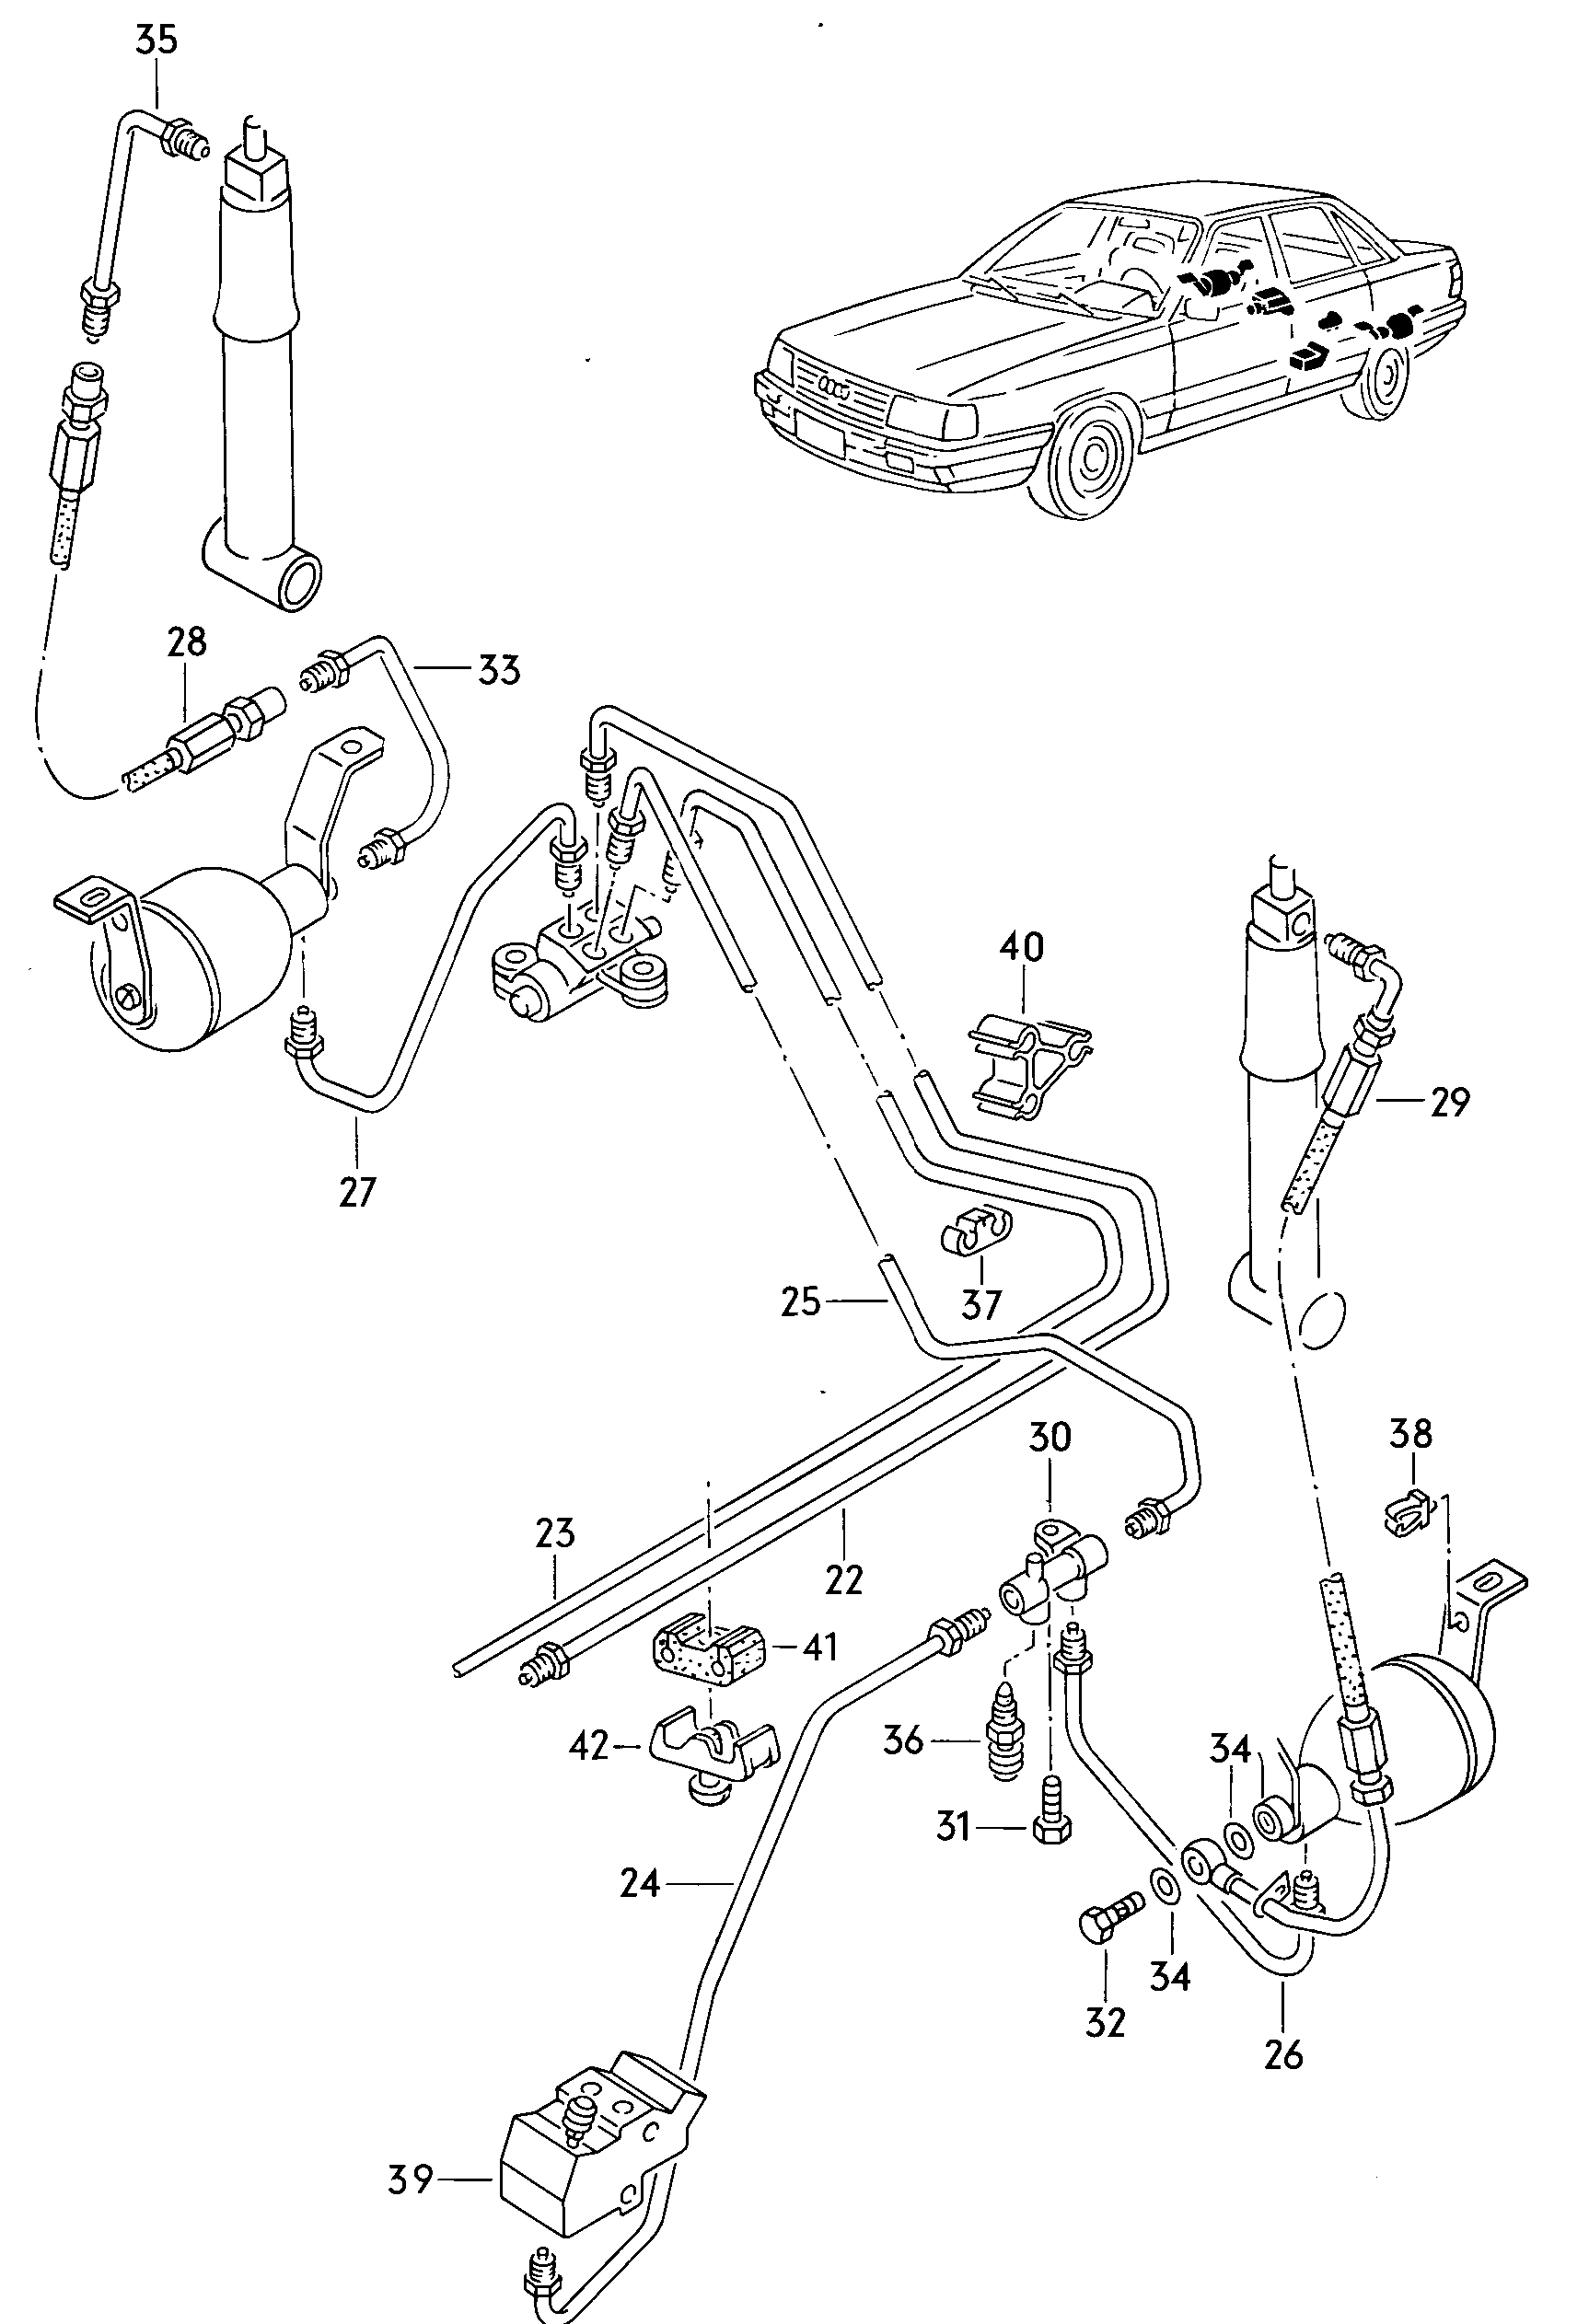 connecting parts for self-<br>levelling rear - Audi 5000 - a50